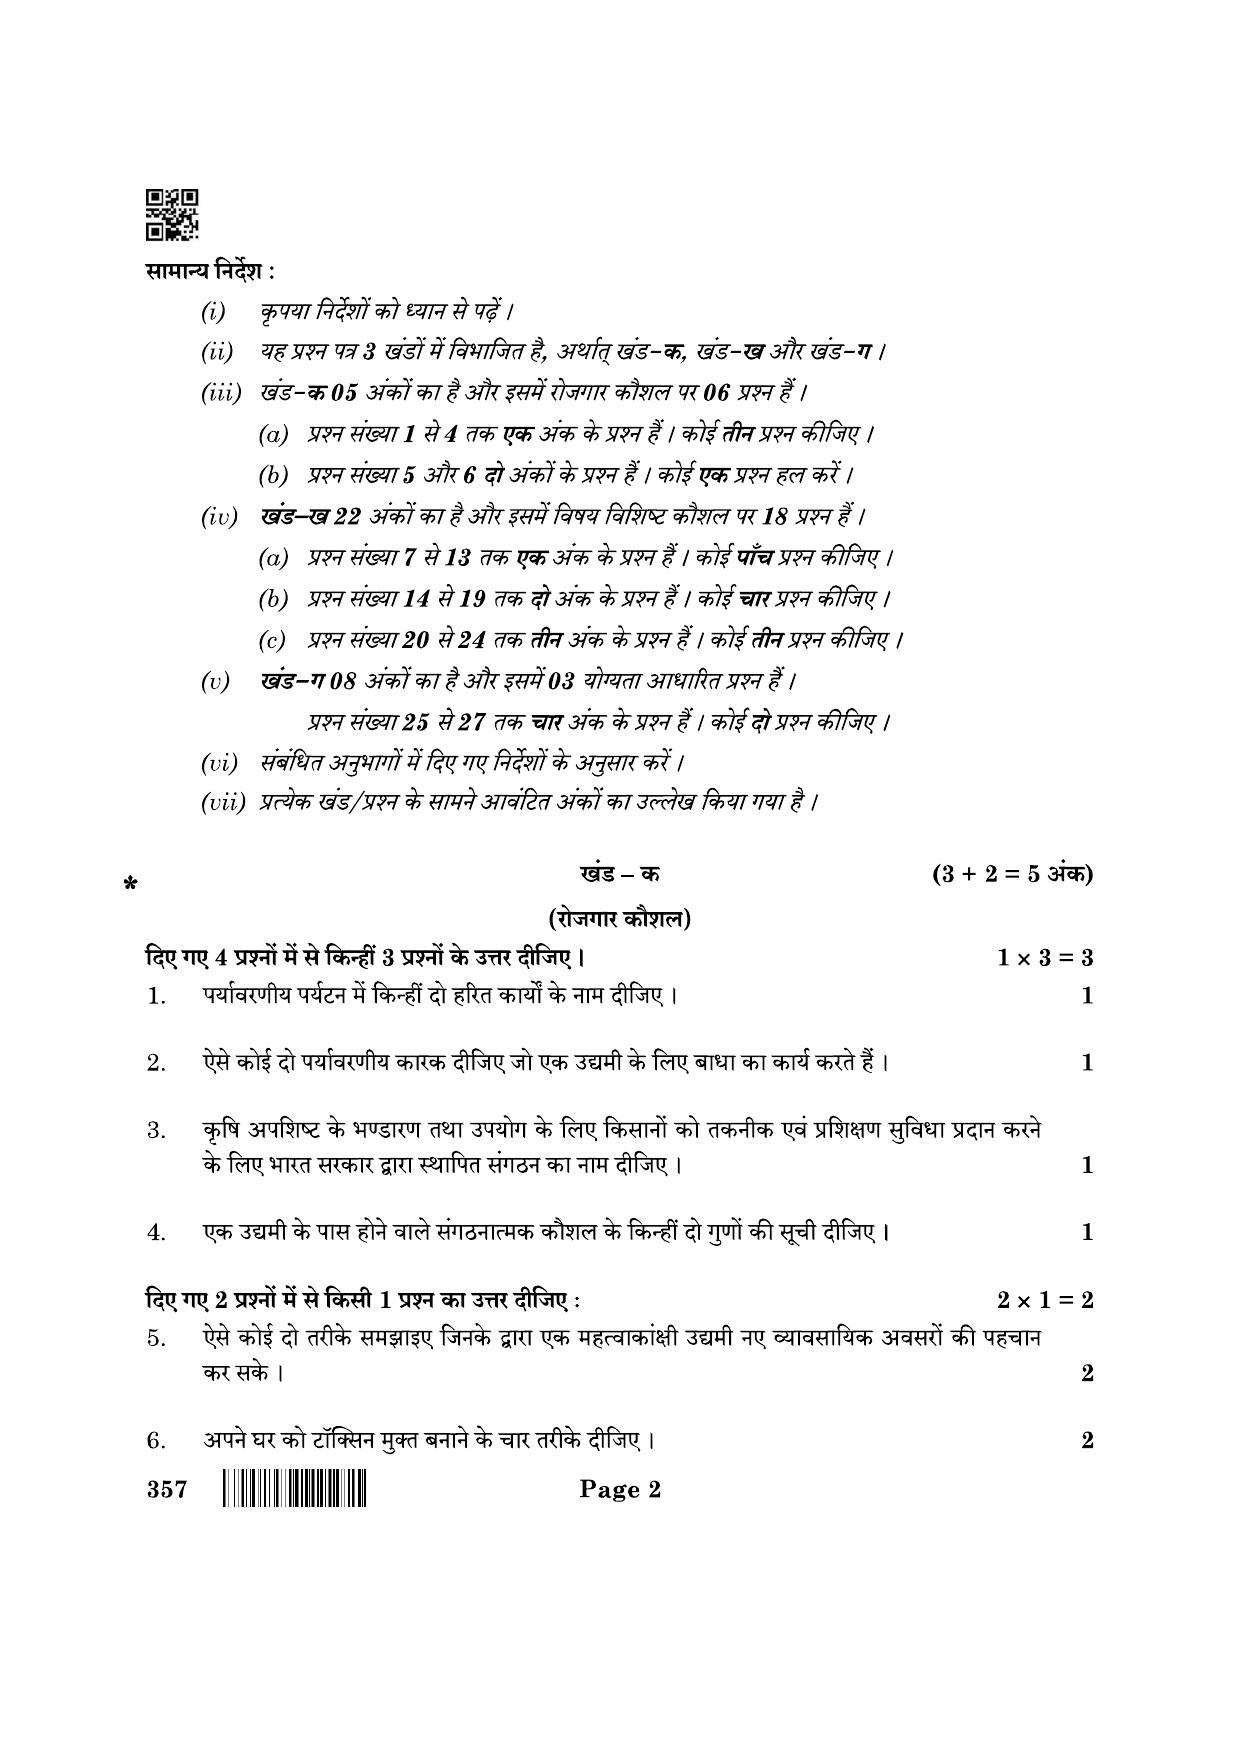 CBSE Class 12 357 Business Administration 2022 Question Paper - Page 2